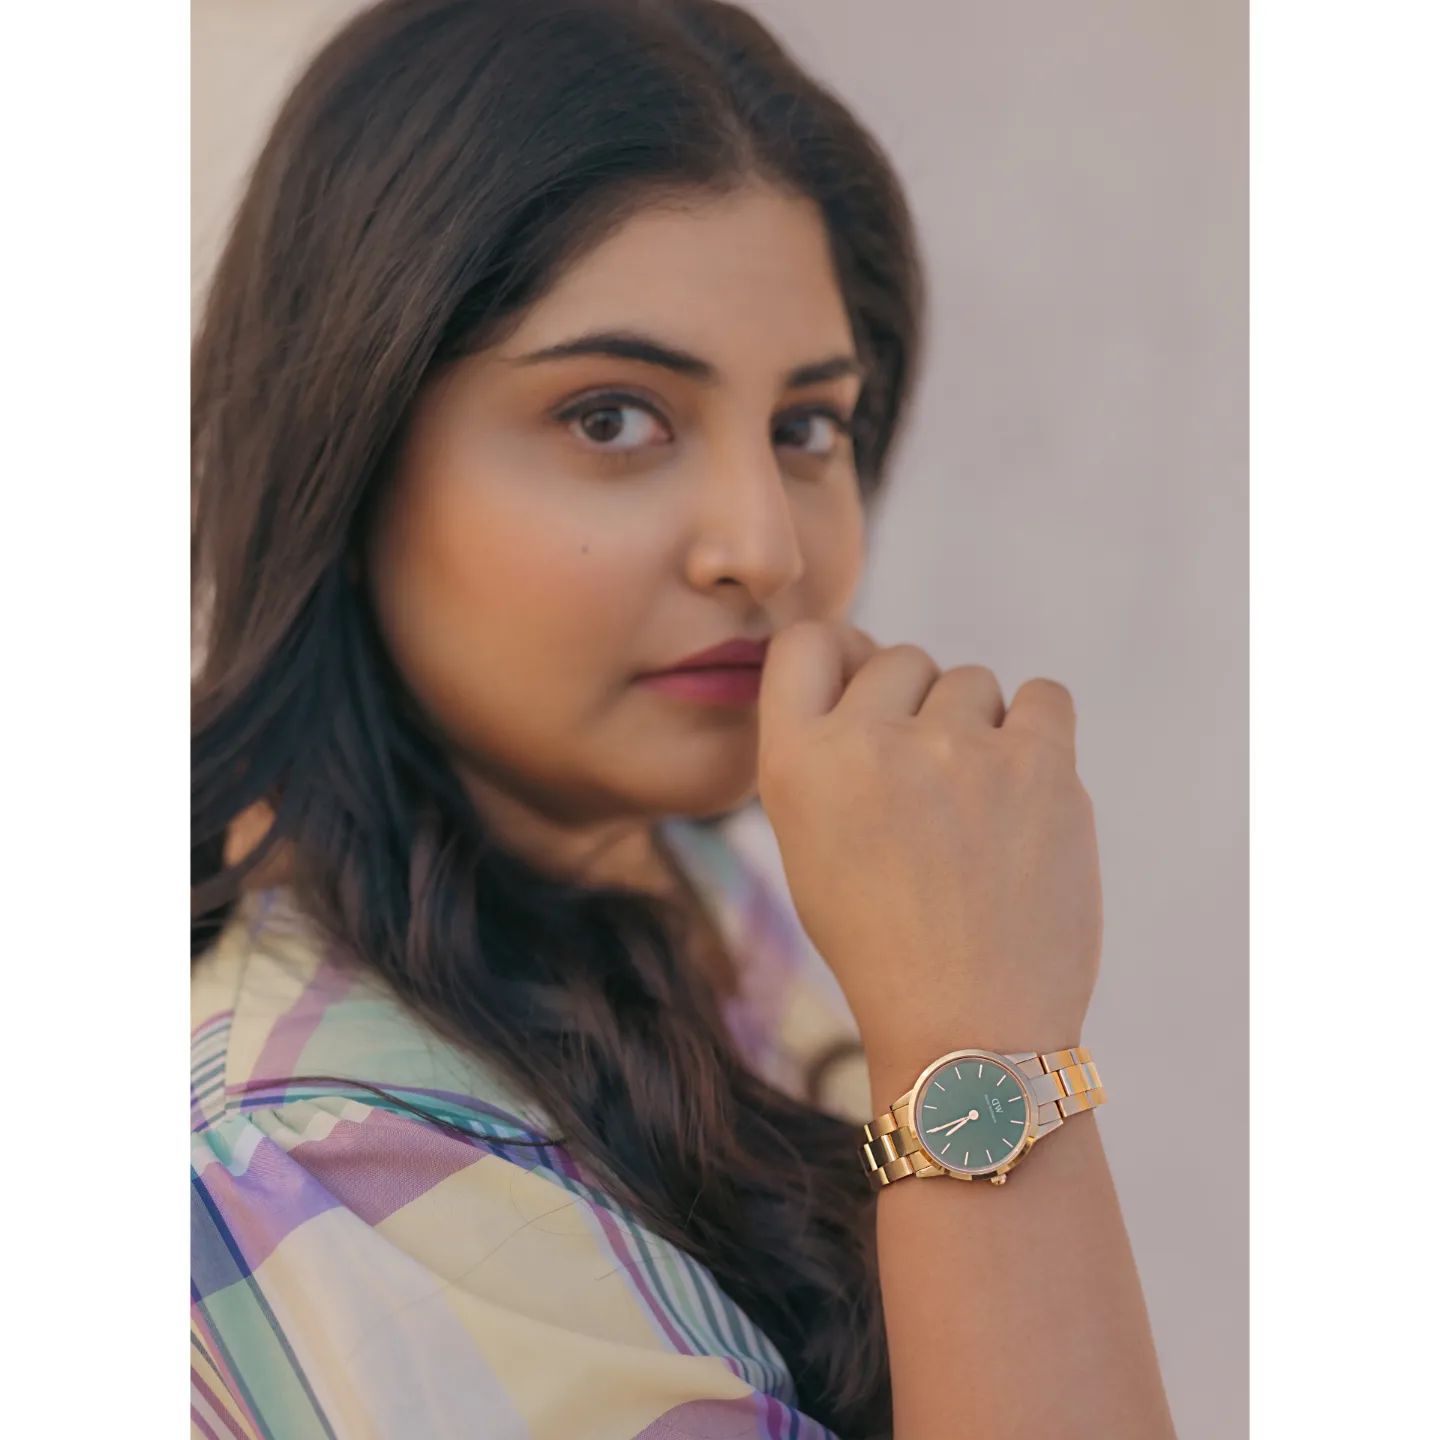 manjima mohan sudden decision of deleting all instagram posts to spread positivity